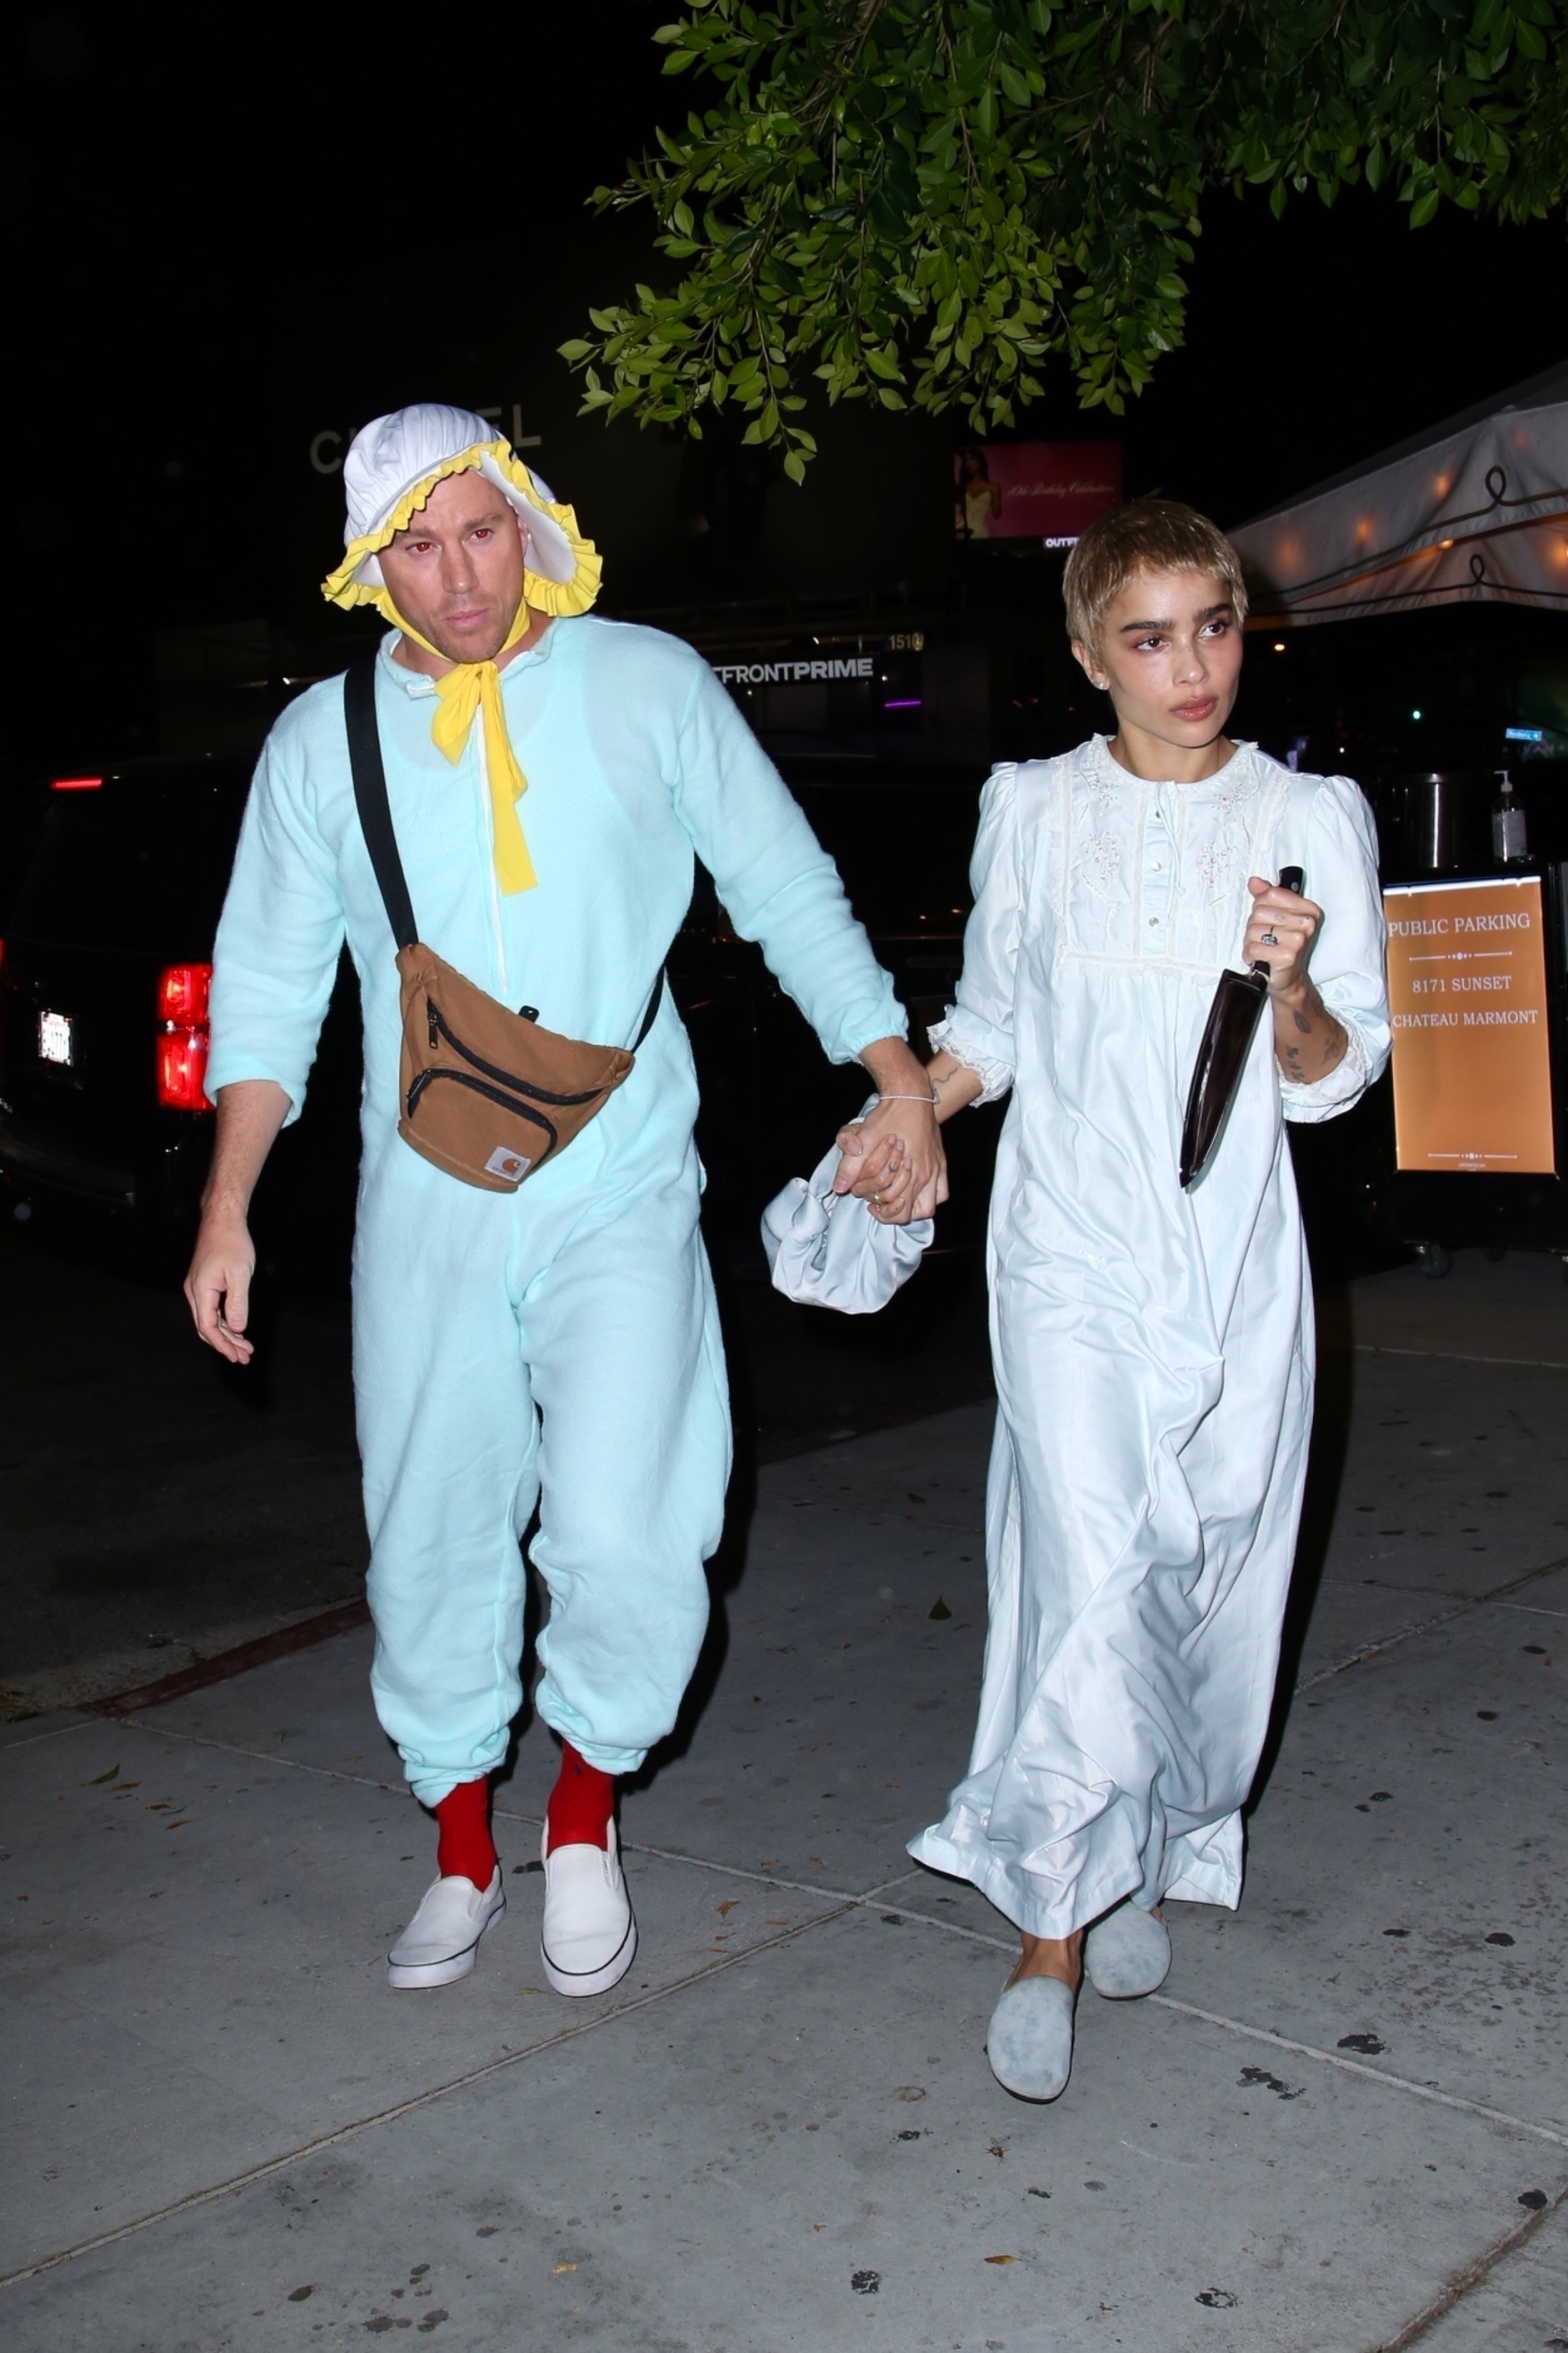 the two holding hands as they walk to a party in their costumes